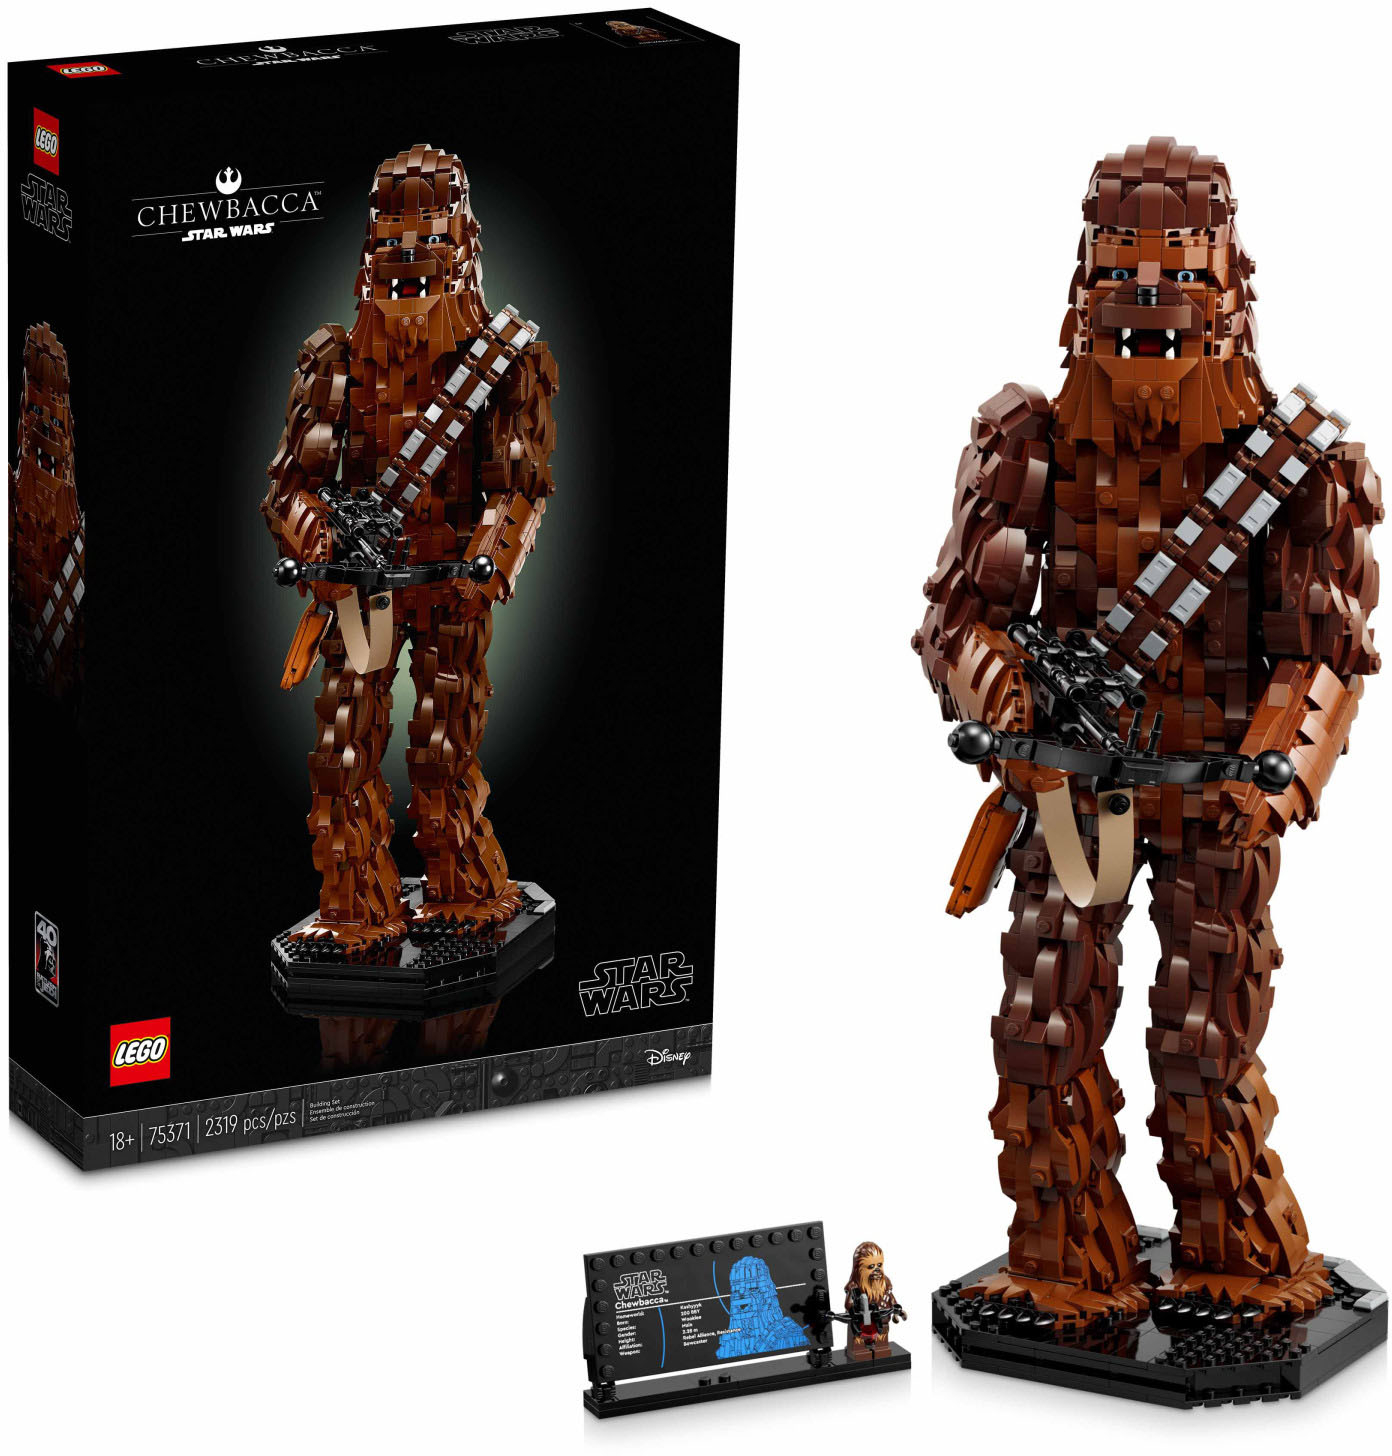 Lego is celebrating Star Wars Day with new Return of the Jedi sets